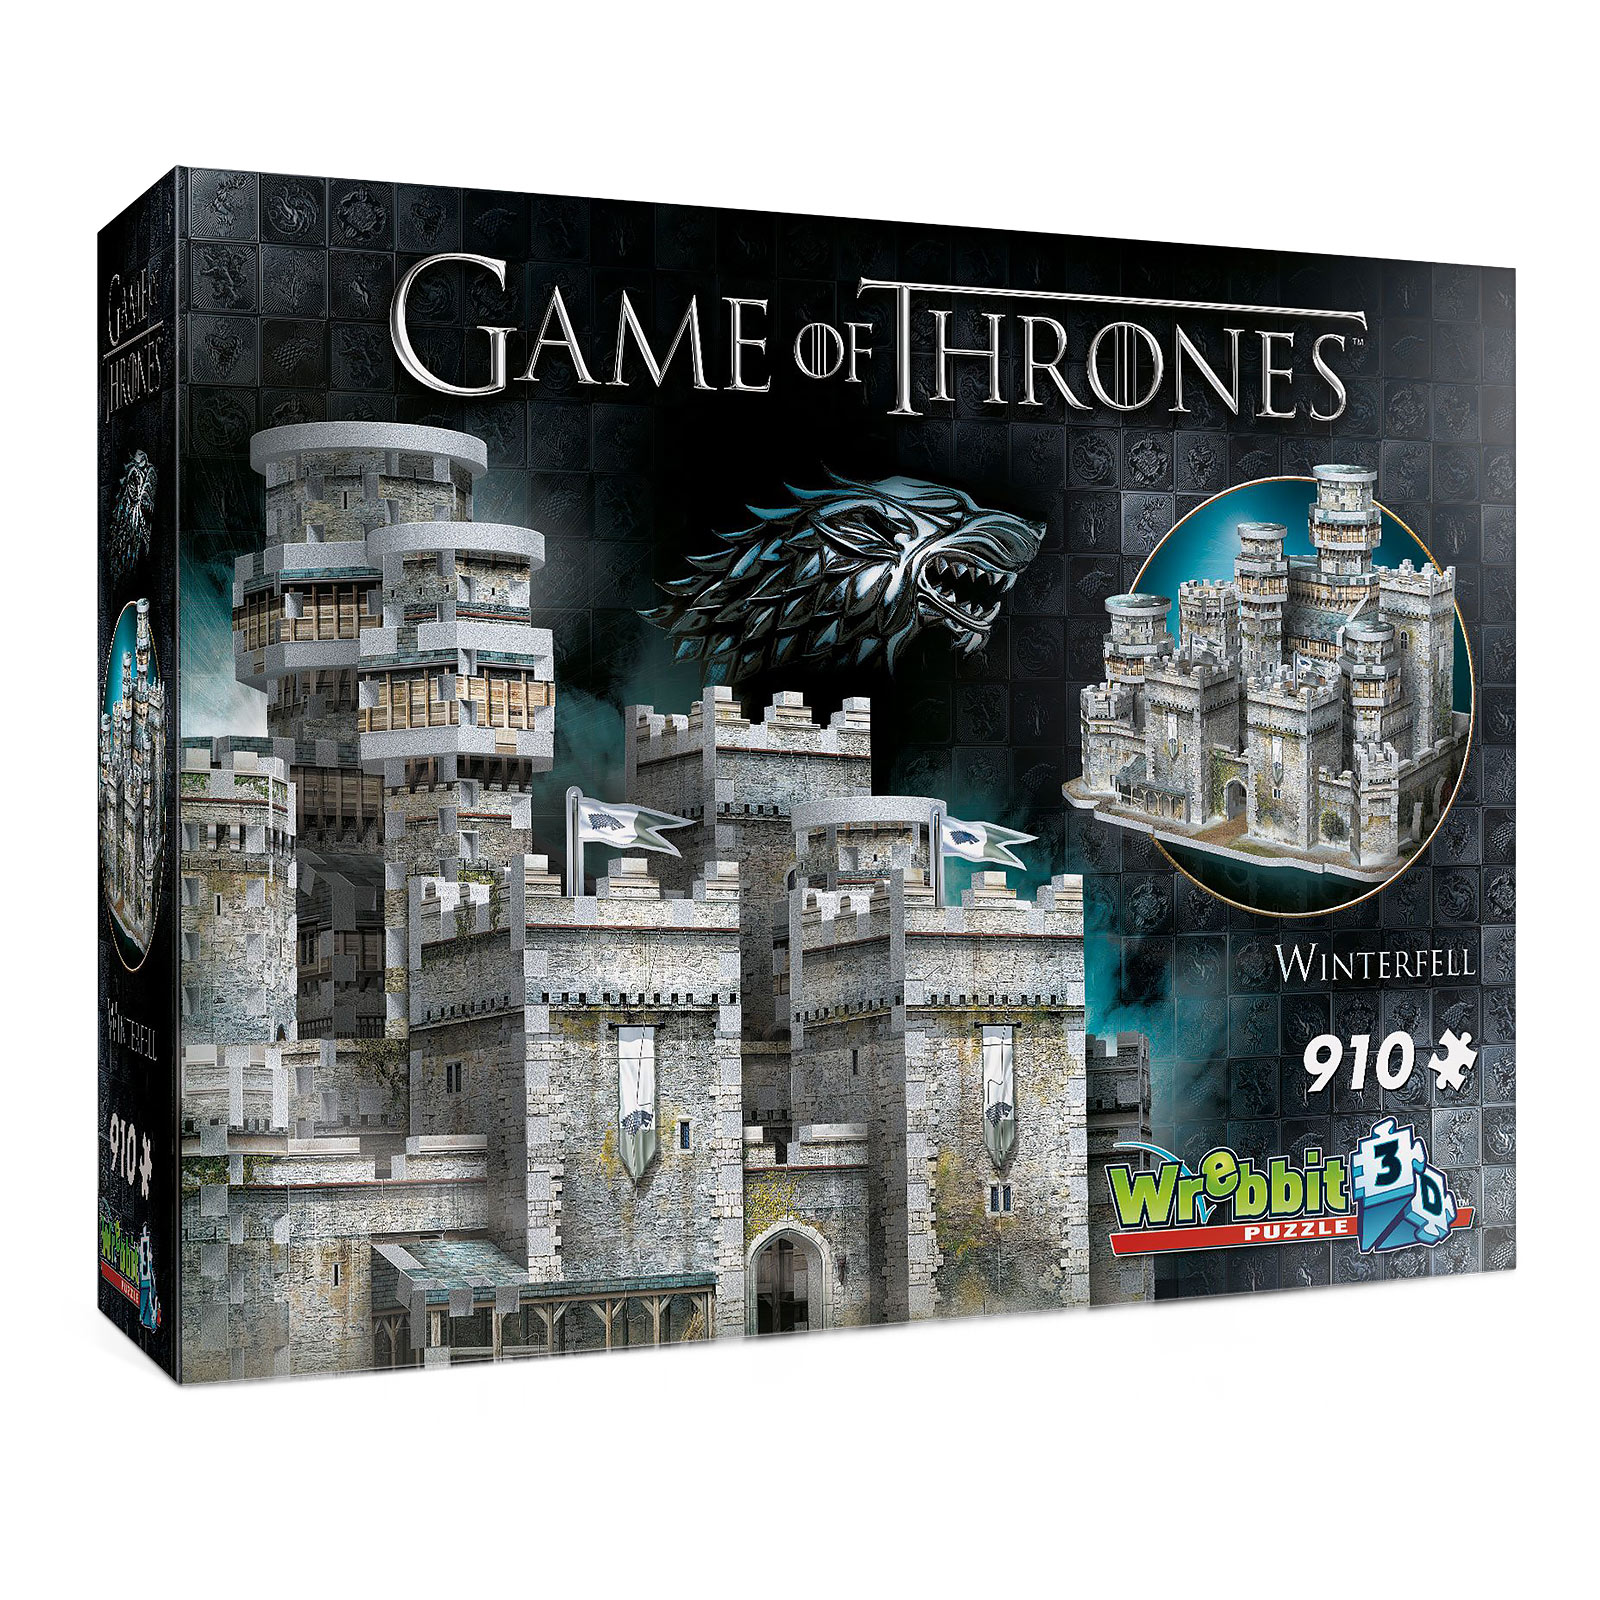 Game of Thrones - Puzzle 3D de Winterfell